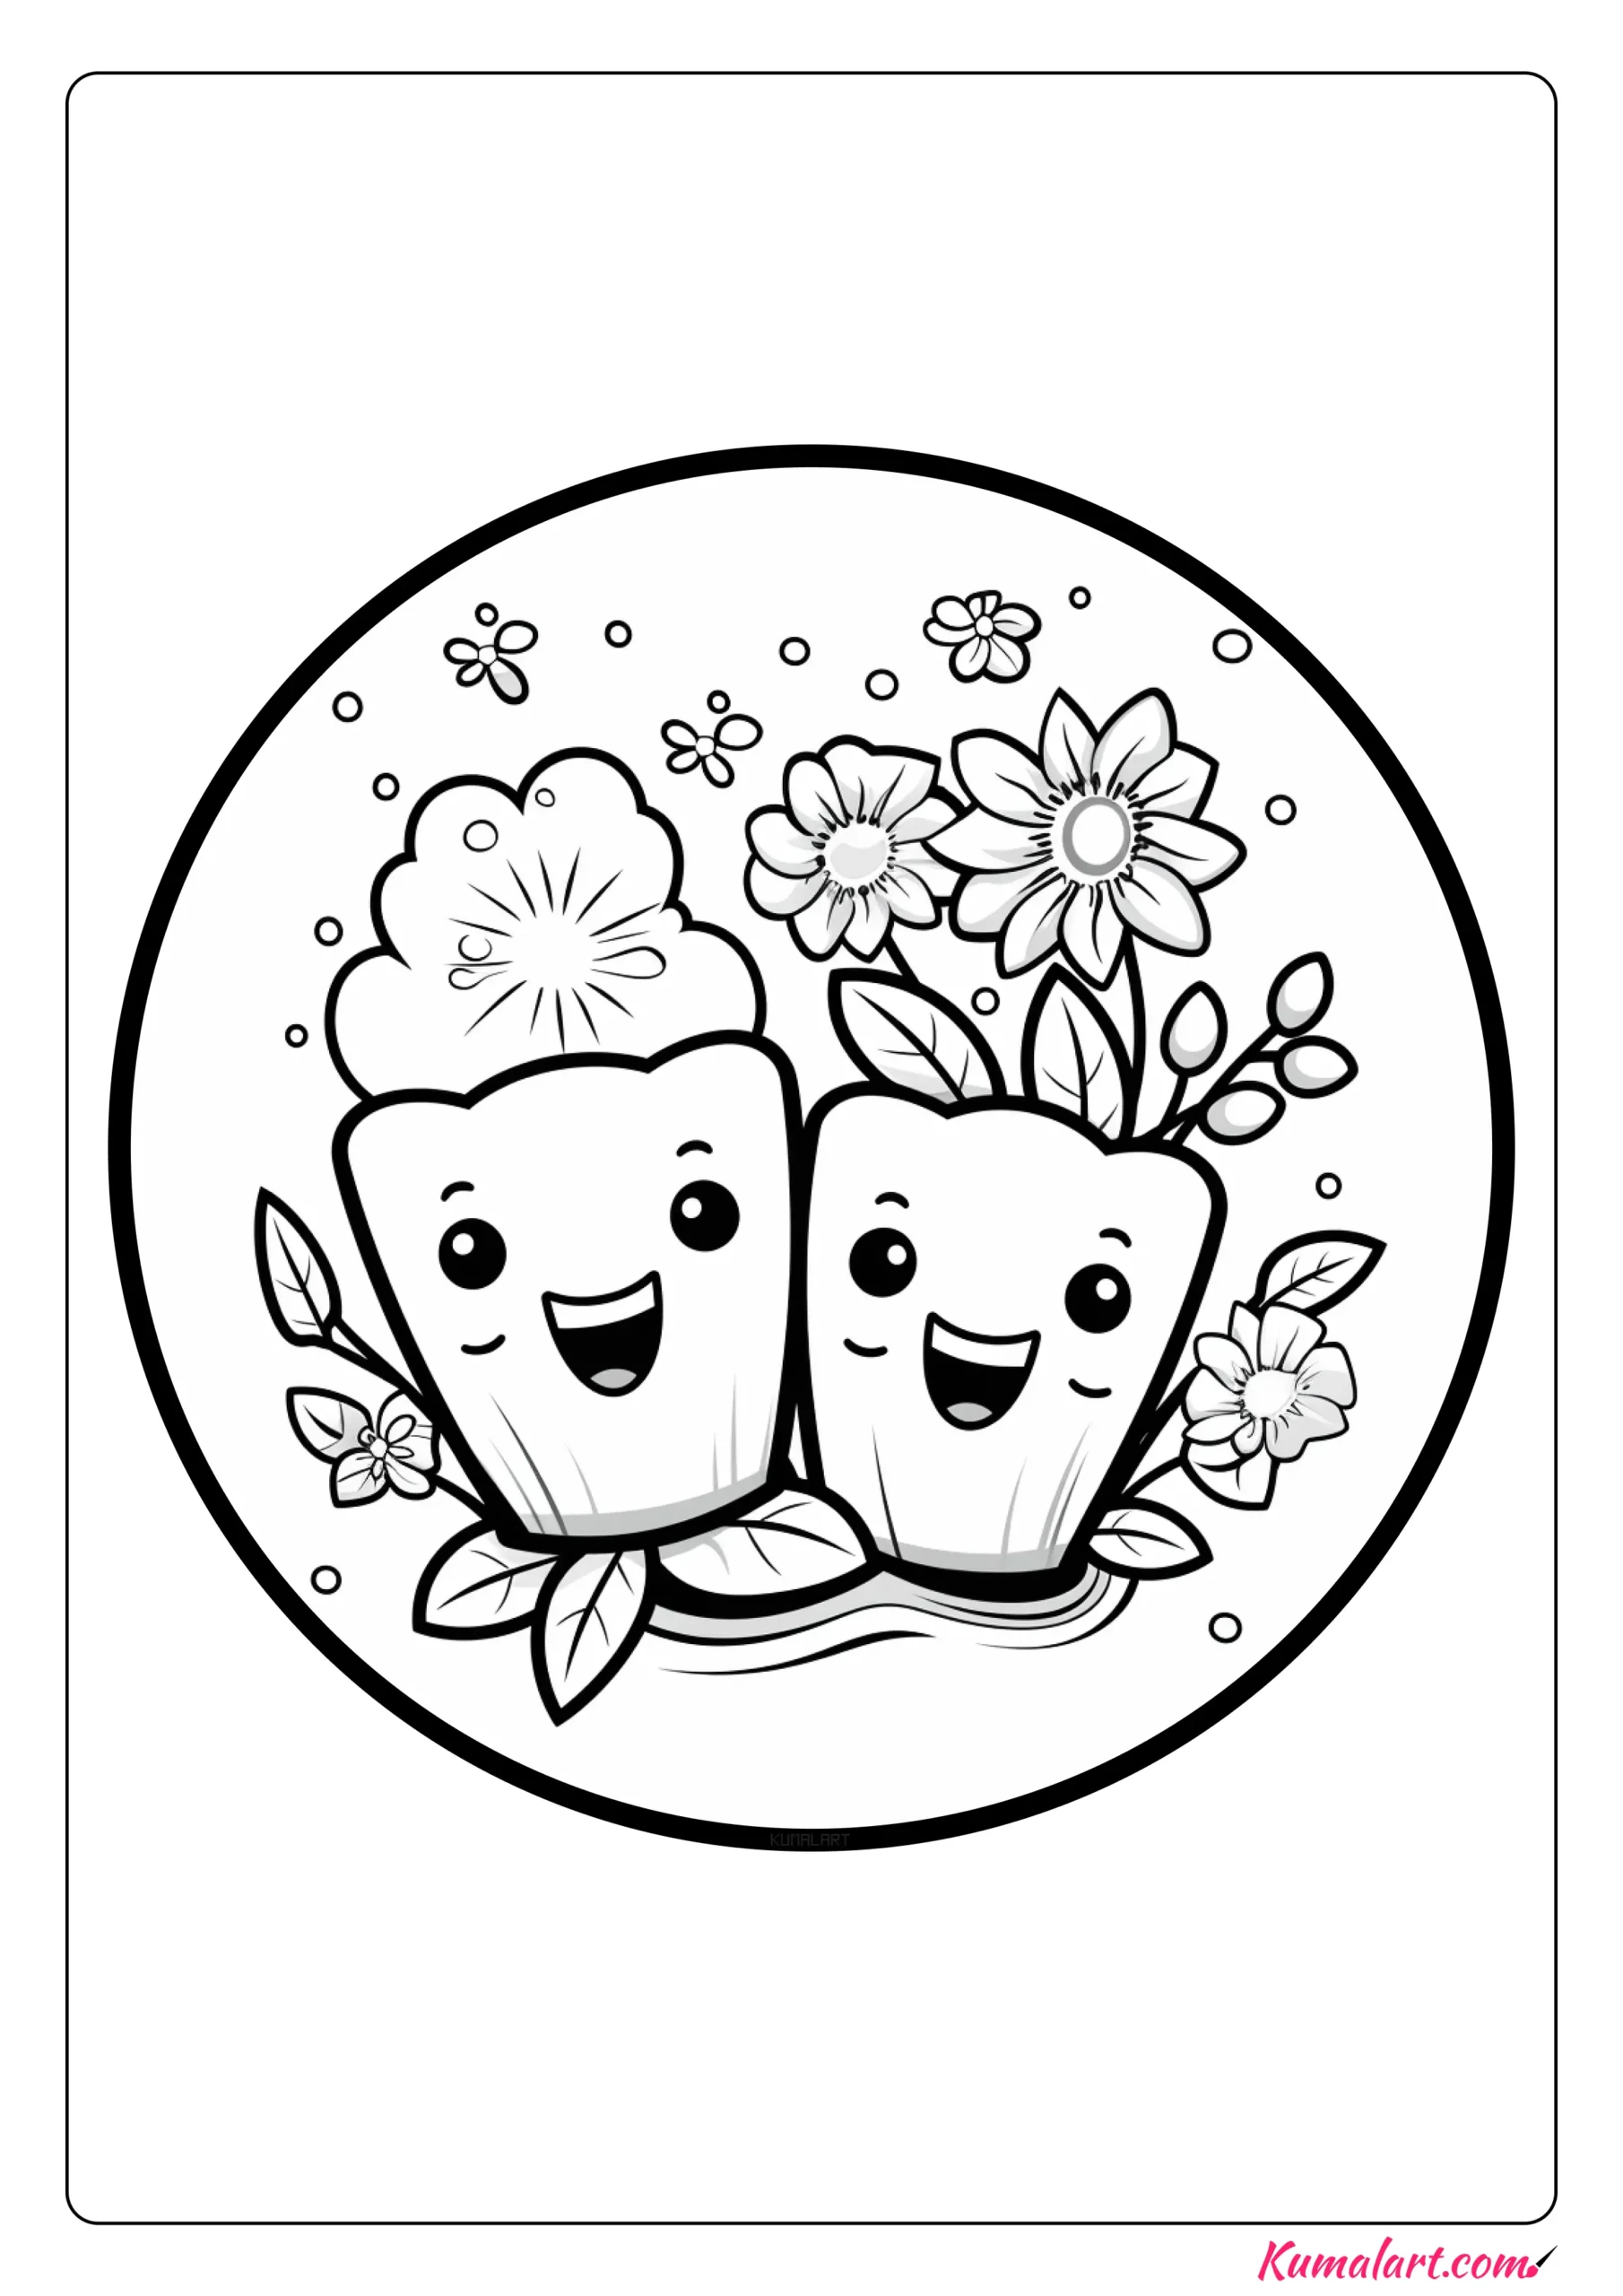 Delightful Tooth Brushing Coloring Page